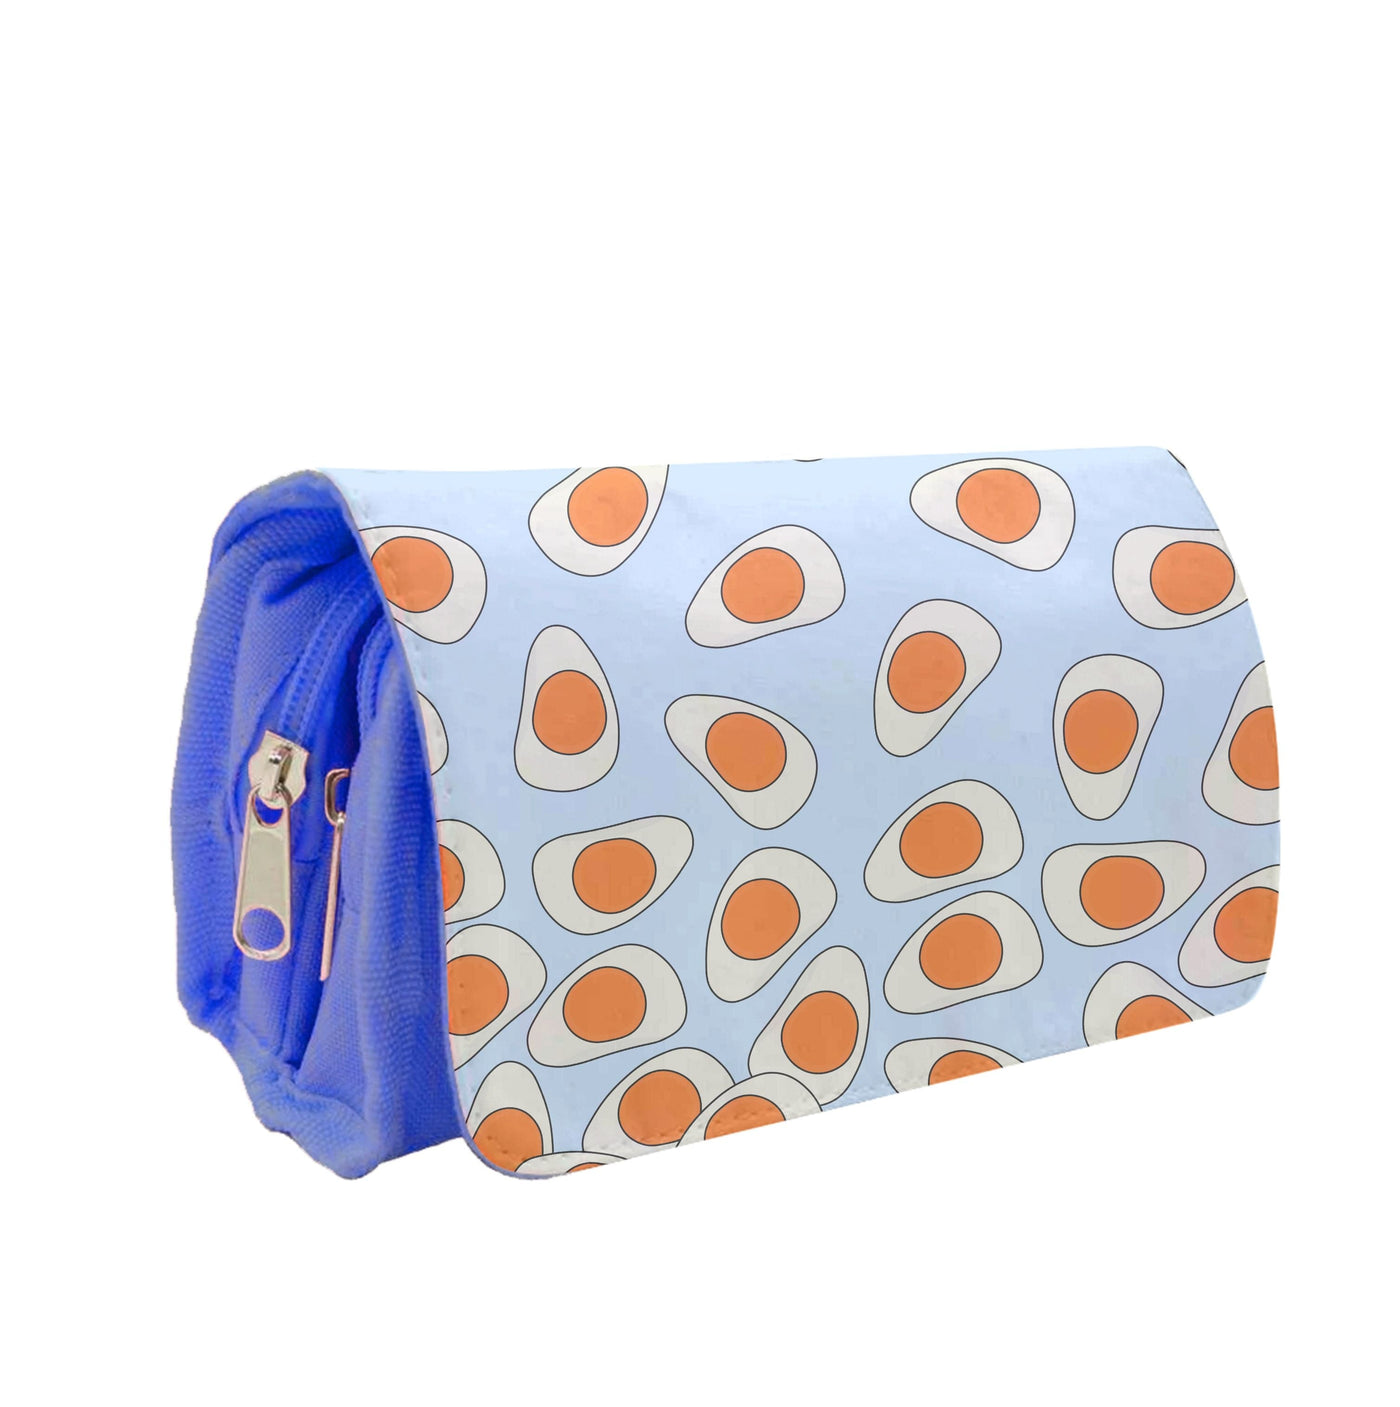 Fried Eggs - Sweets Patterns Pencil Case